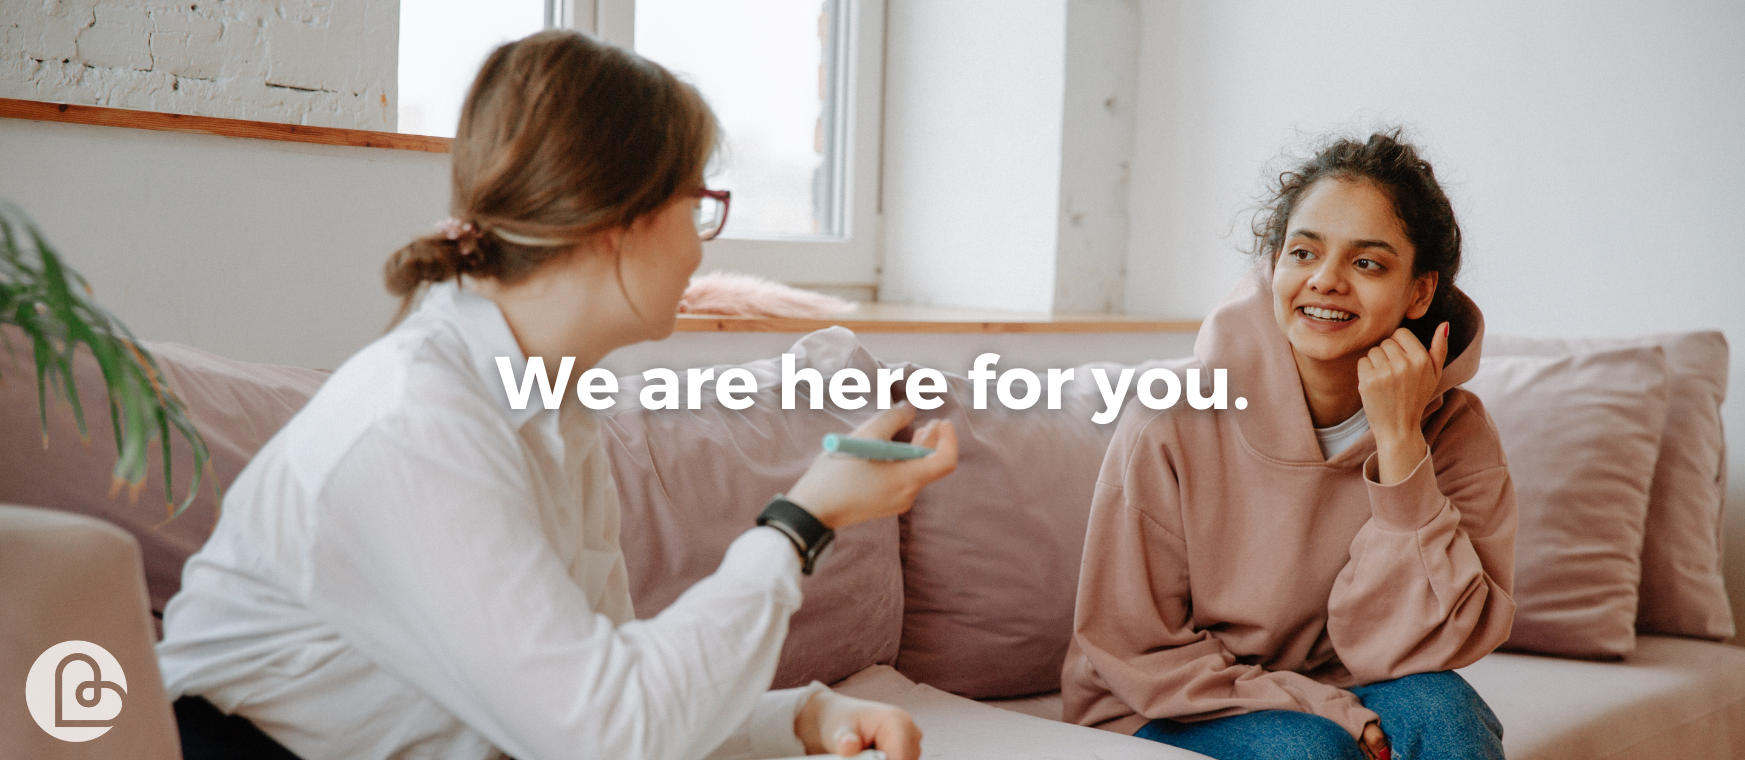 Image of a support worker and client sitting on a couch talking. Overlying text reads: We are here for you.